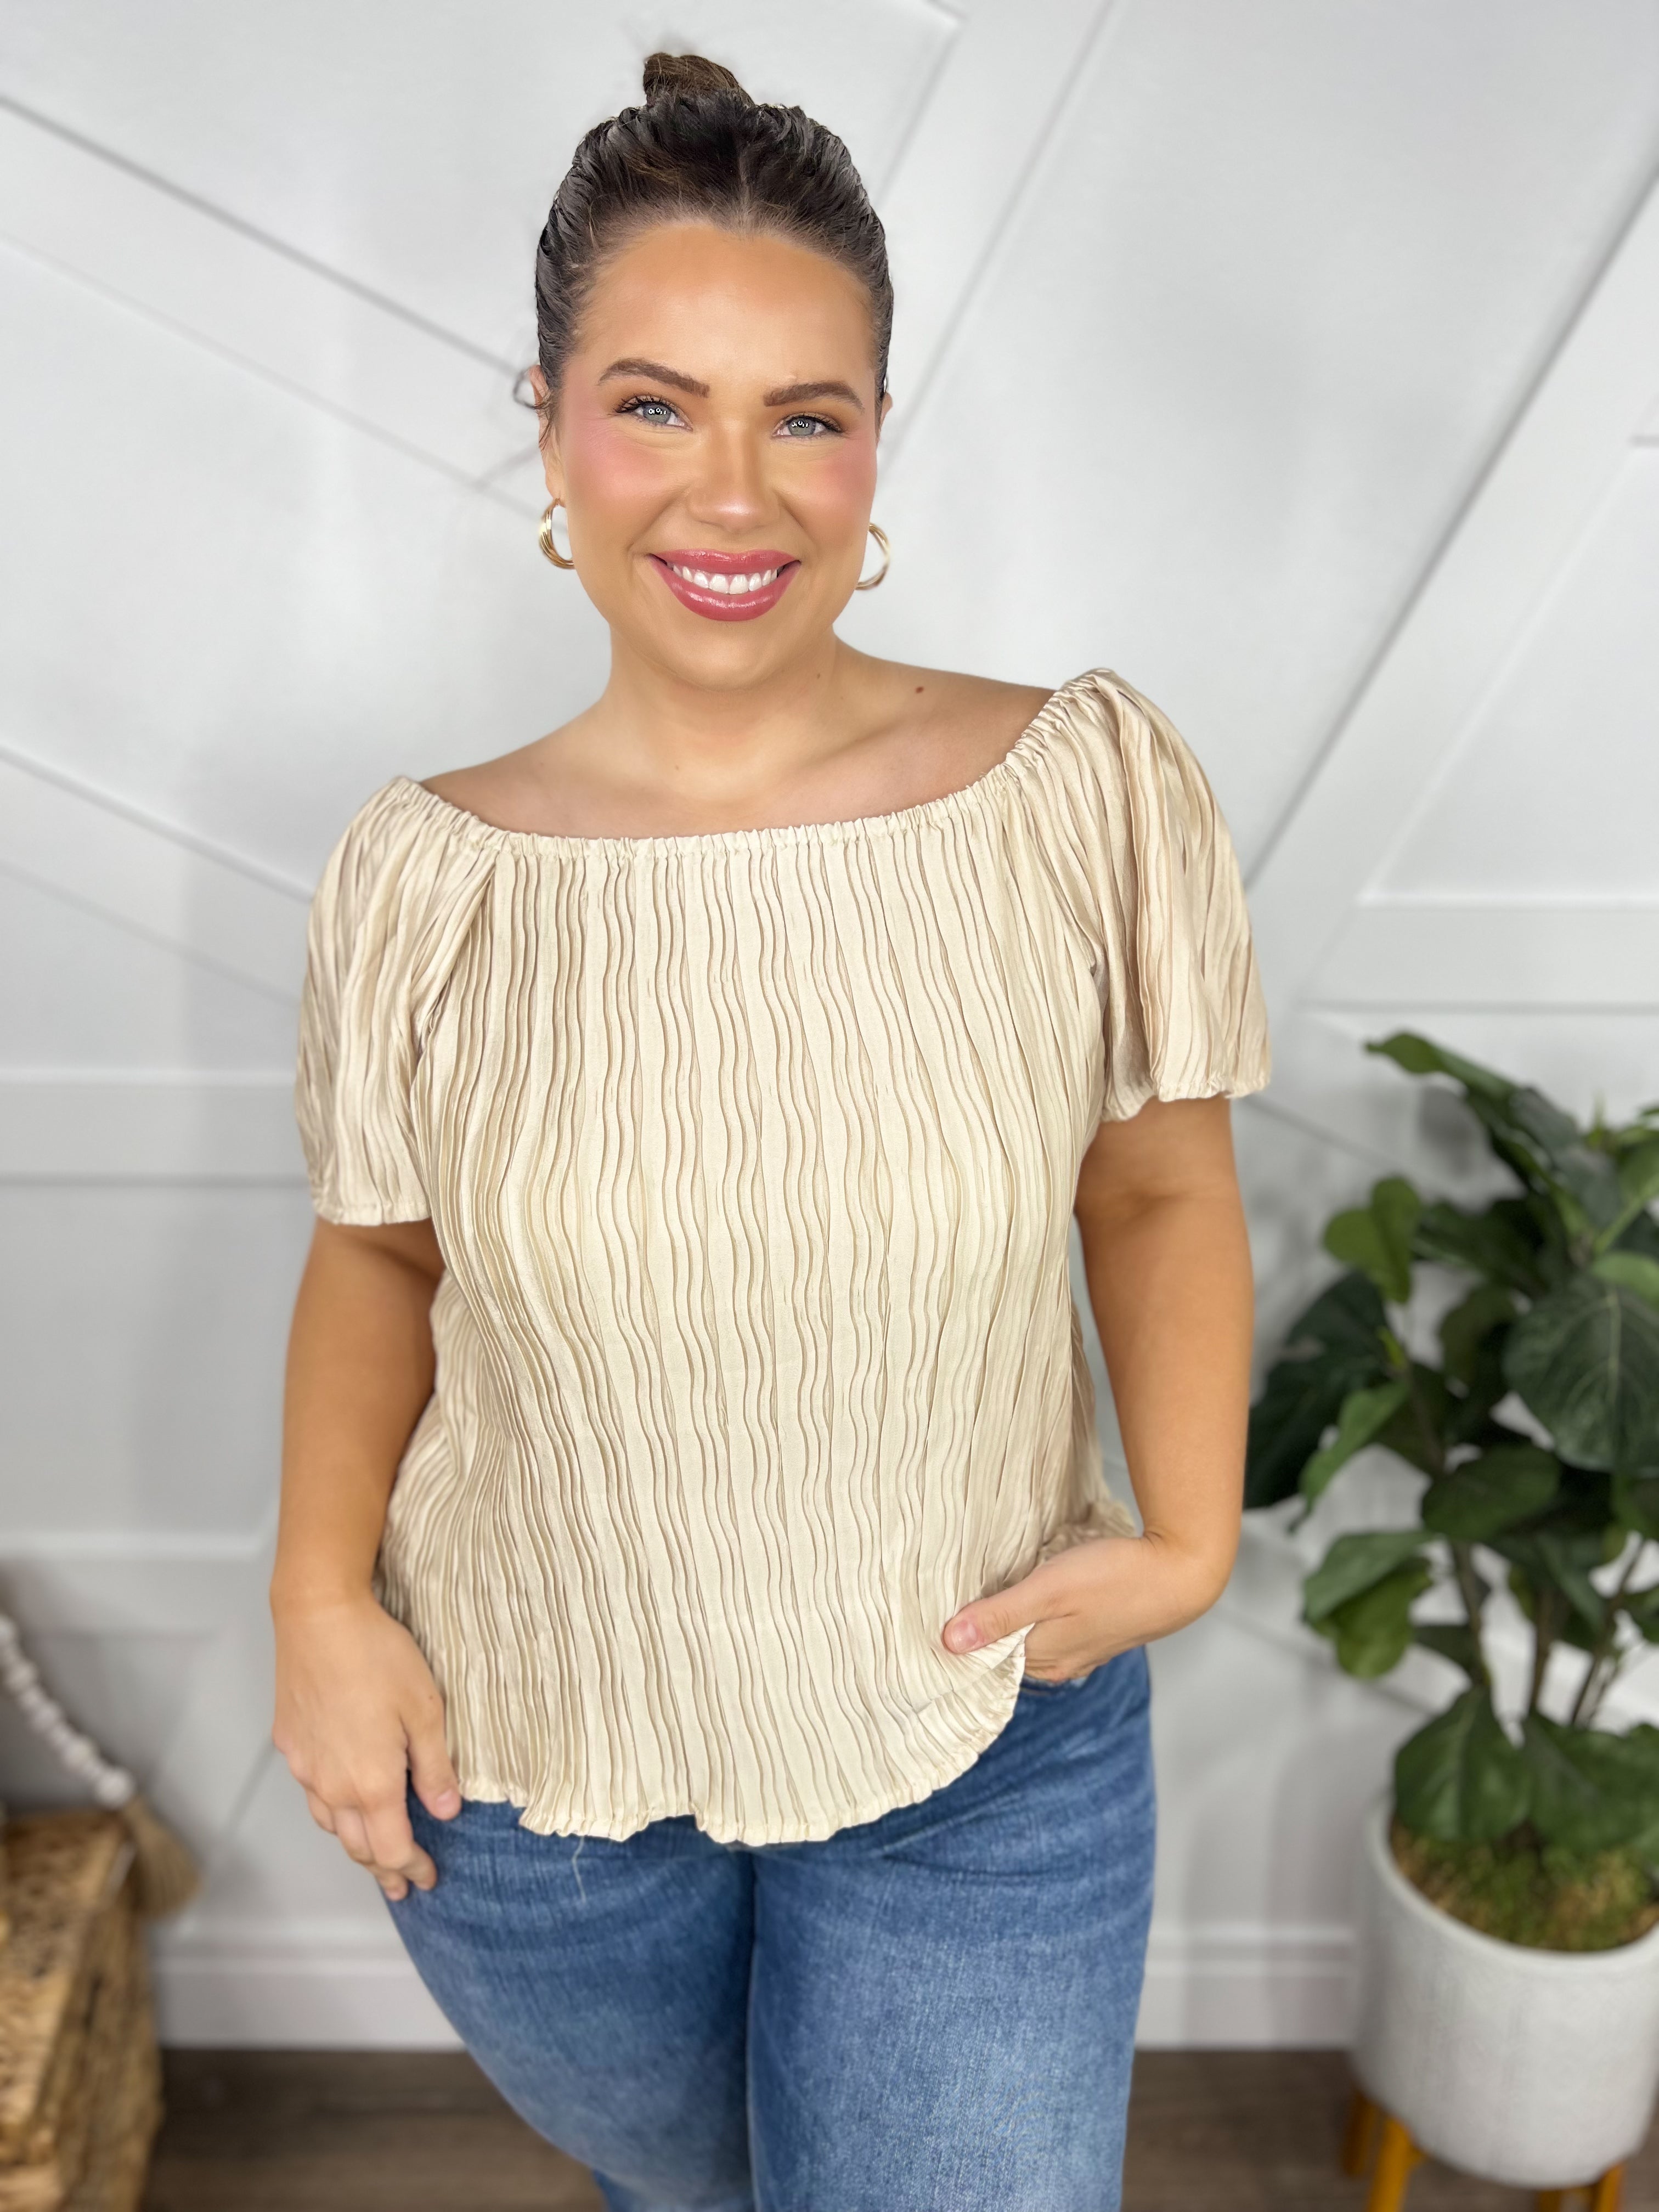 RESTOCK: Lustrous Elegance Top-110 Short Sleeve Top-Southern Grace-Heathered Boho Boutique, Women's Fashion and Accessories in Palmetto, FL